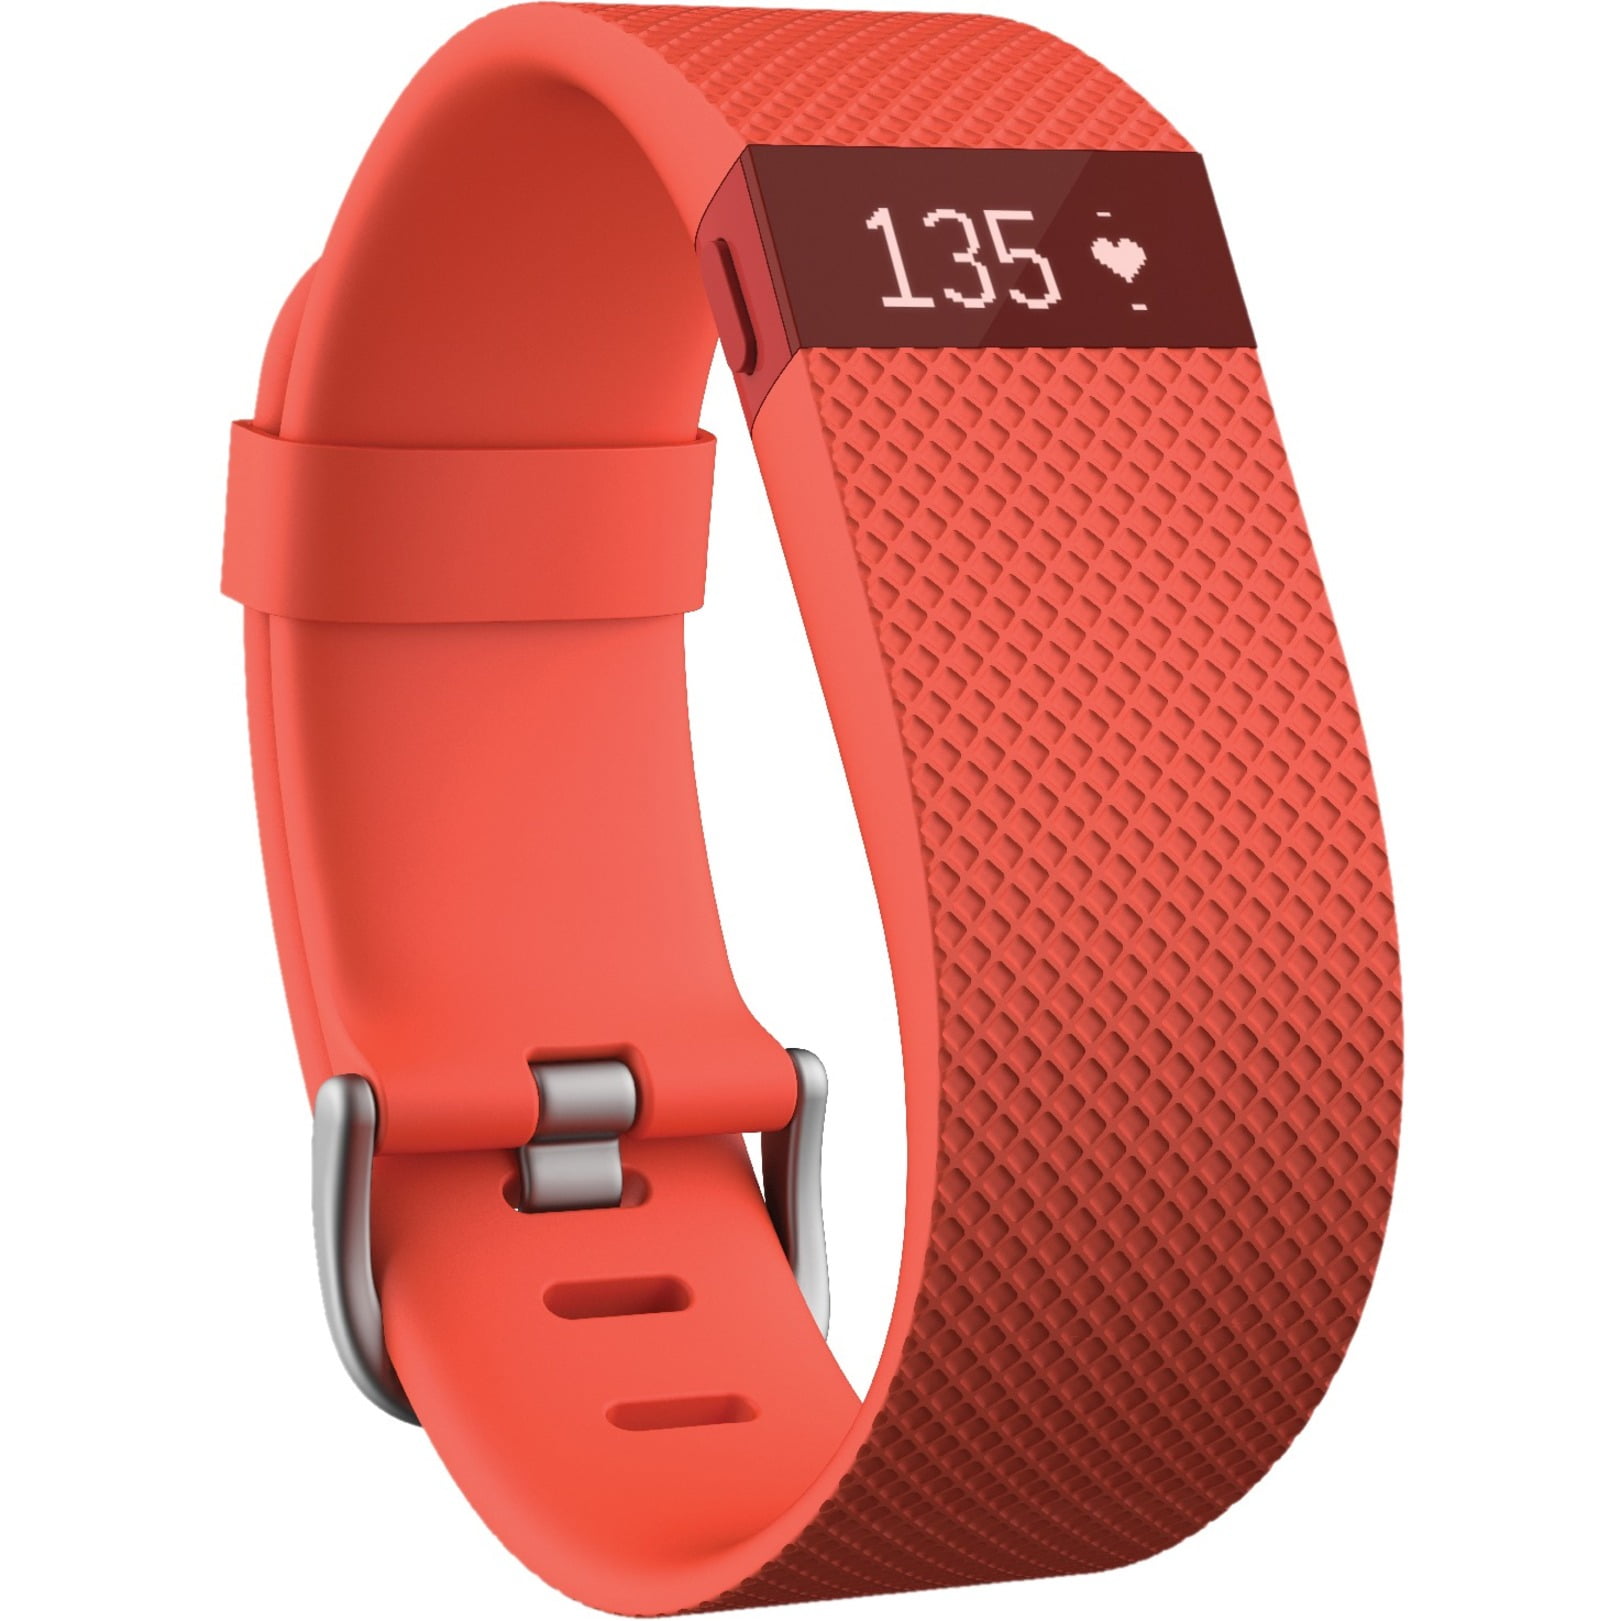 Fitbit Charge HR Fb405p Heart Rate Activity & Sleep Monitor Small Wristband Plum for sale online 